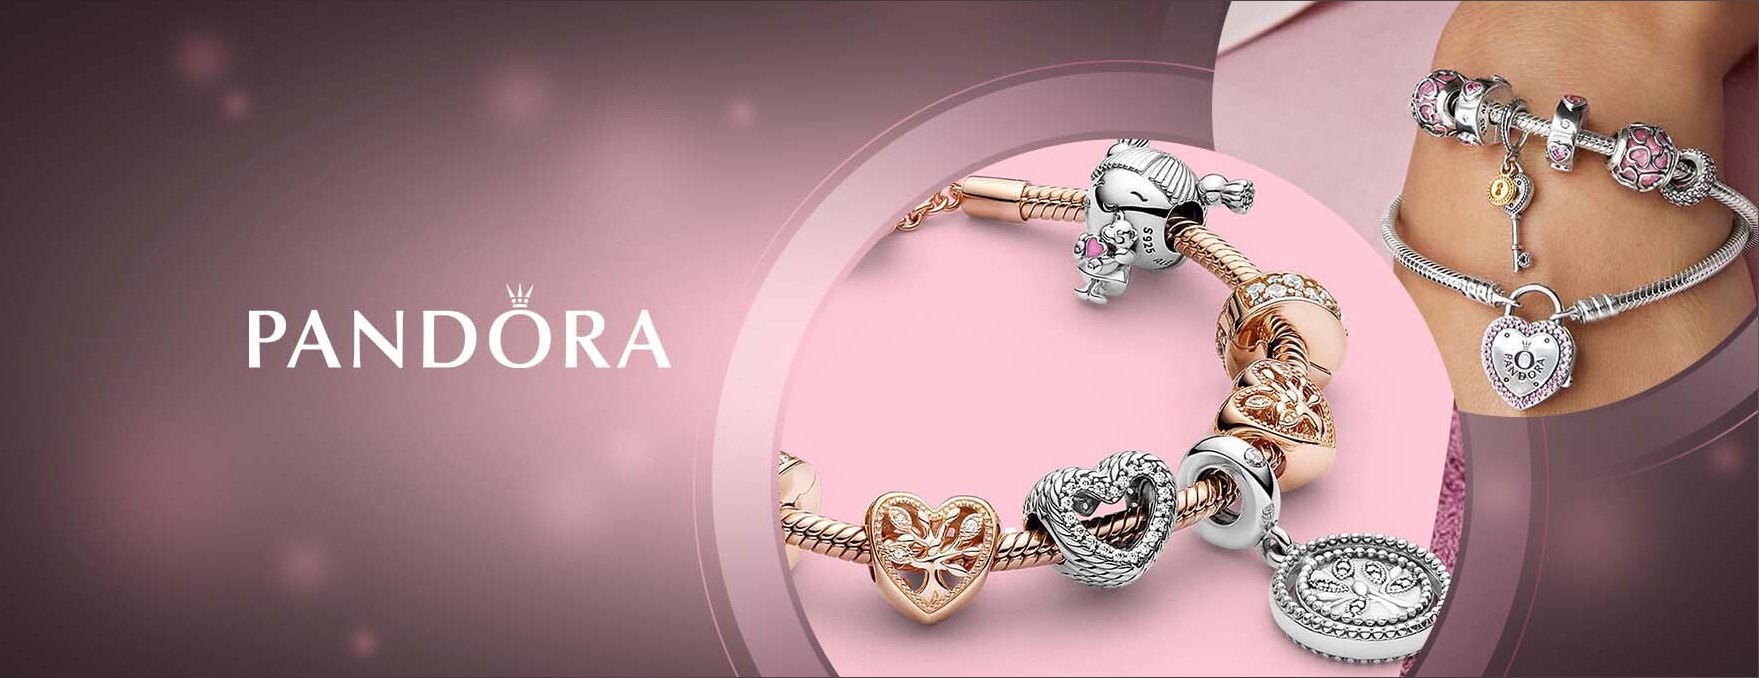 On a pink background image, two images of the bracelet are displayed in circle shape on  the right side and the logo of Pandora in white is displayed on the left